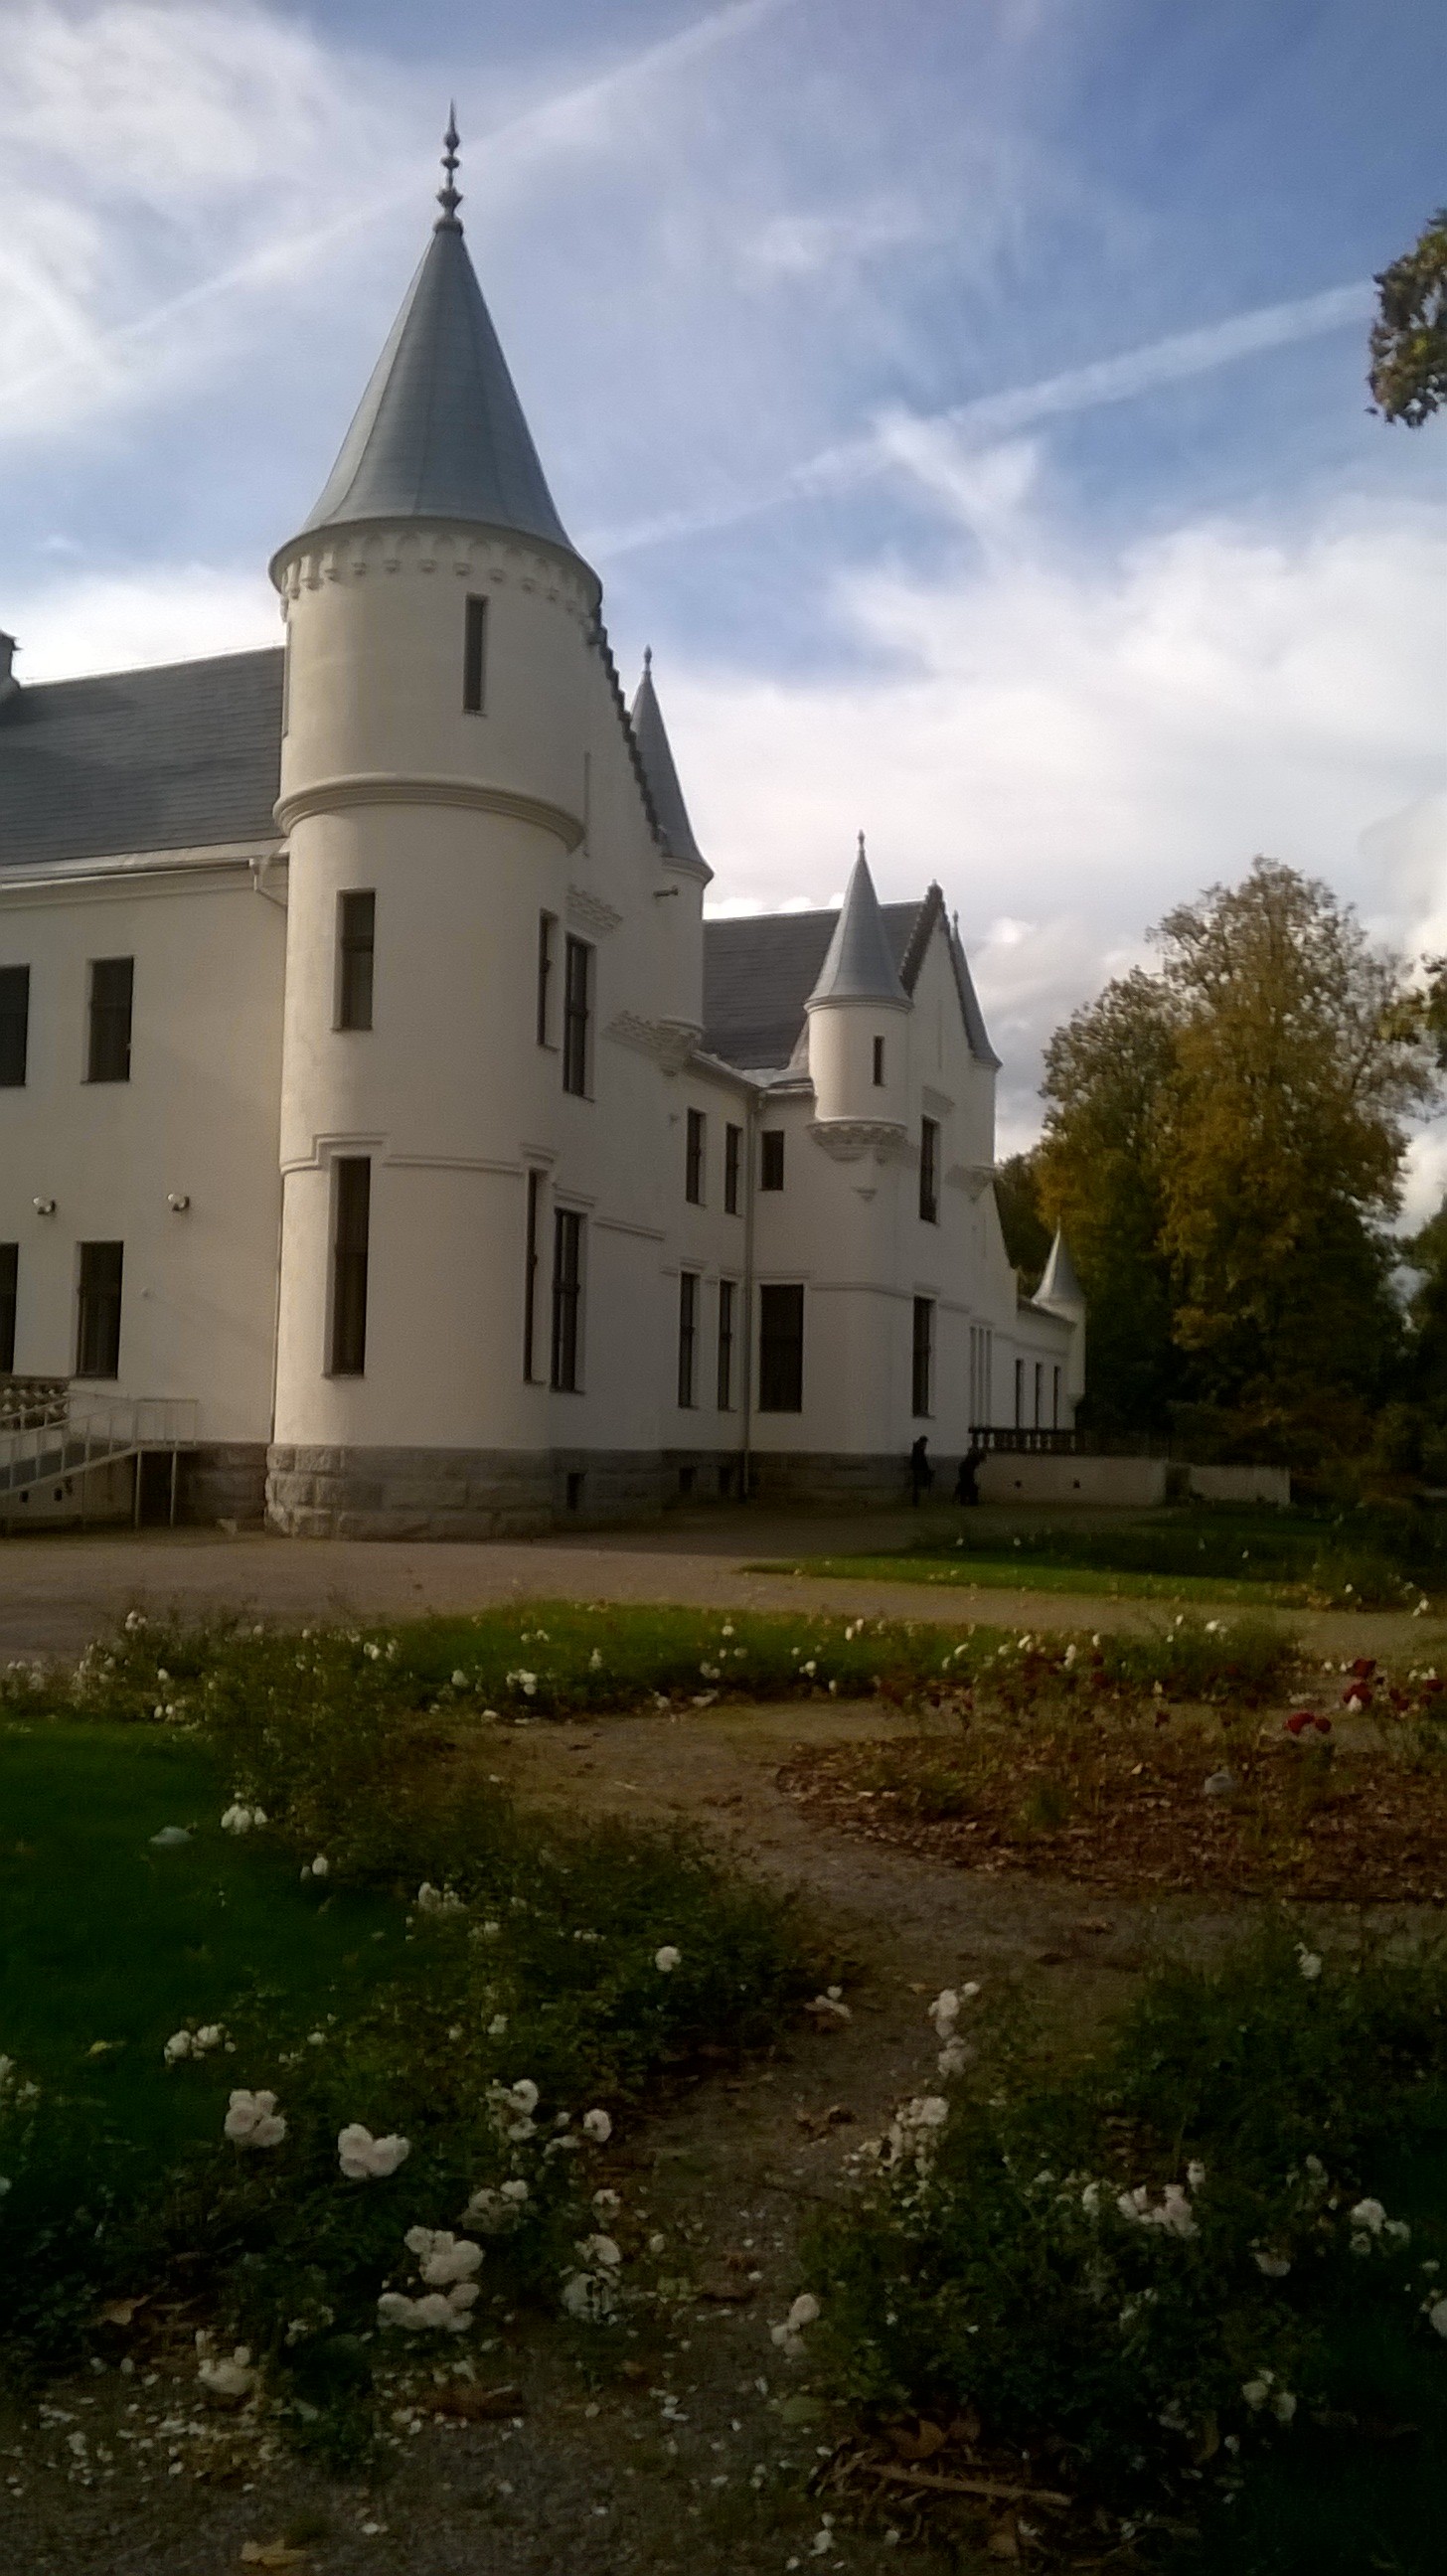 Alatskivi. Main building of the manor. View from the back; close view. rephoto